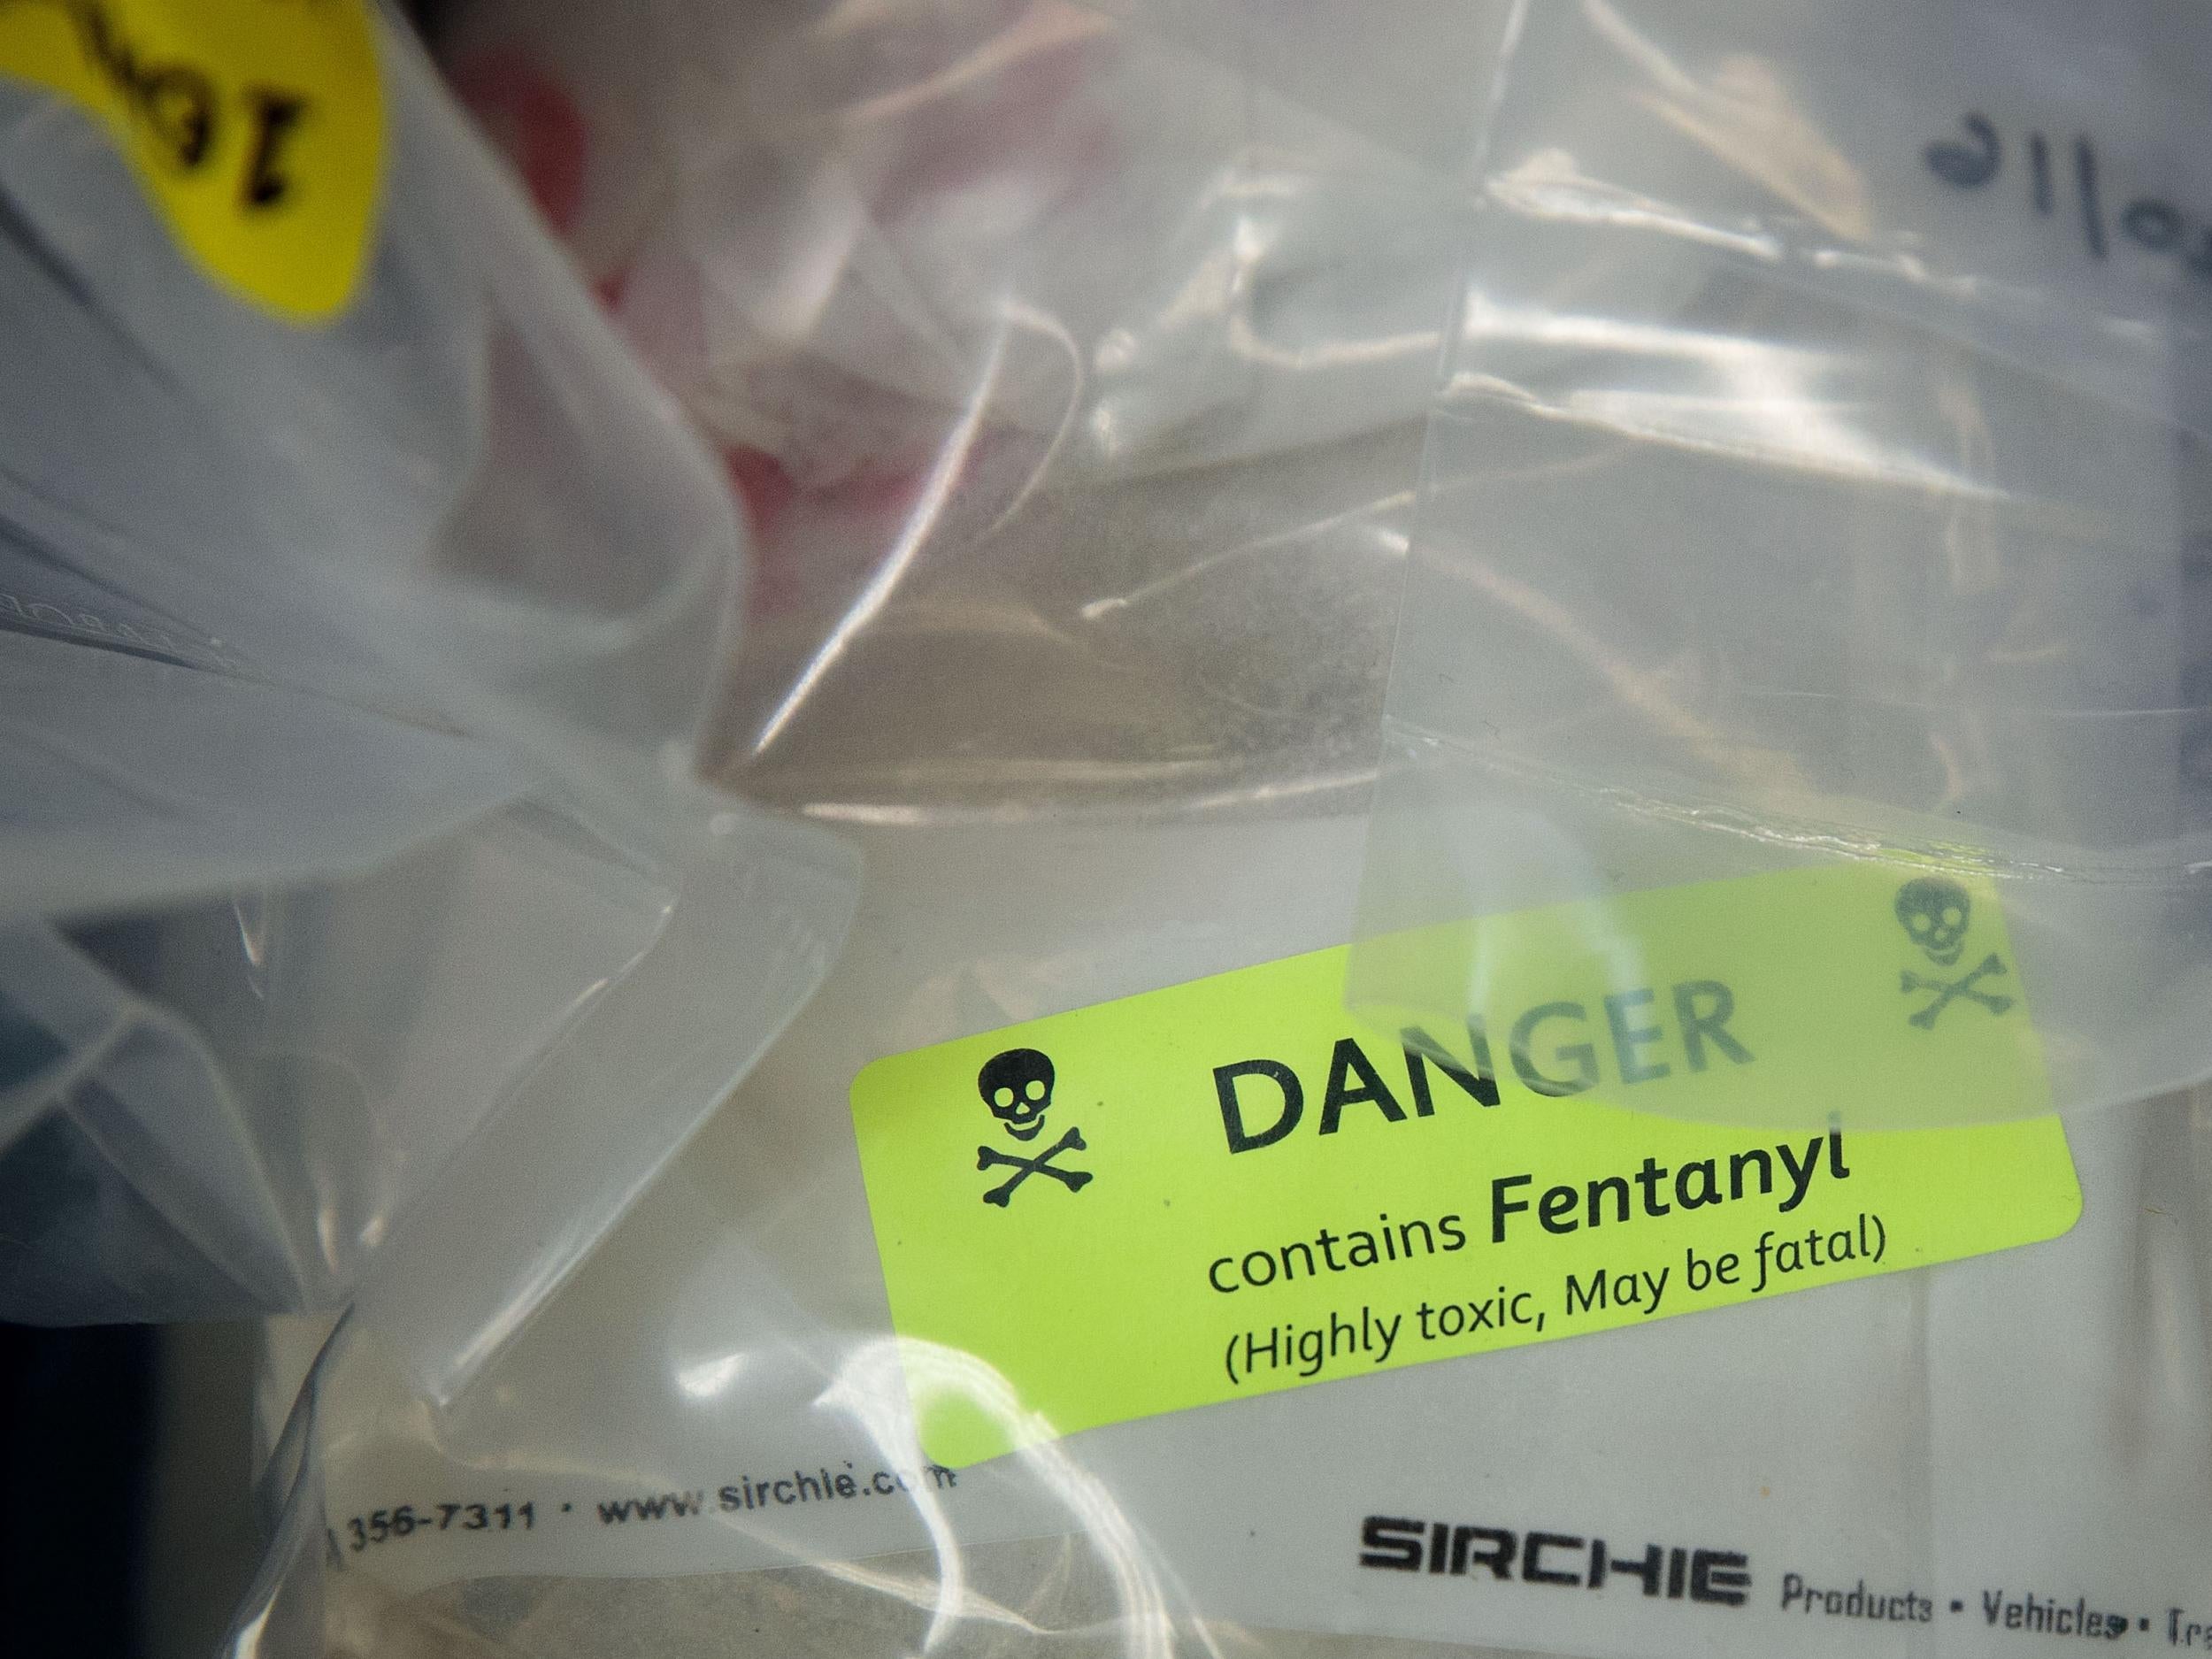 Bags of heroin, some laced with fentanyl, seized by police in New York